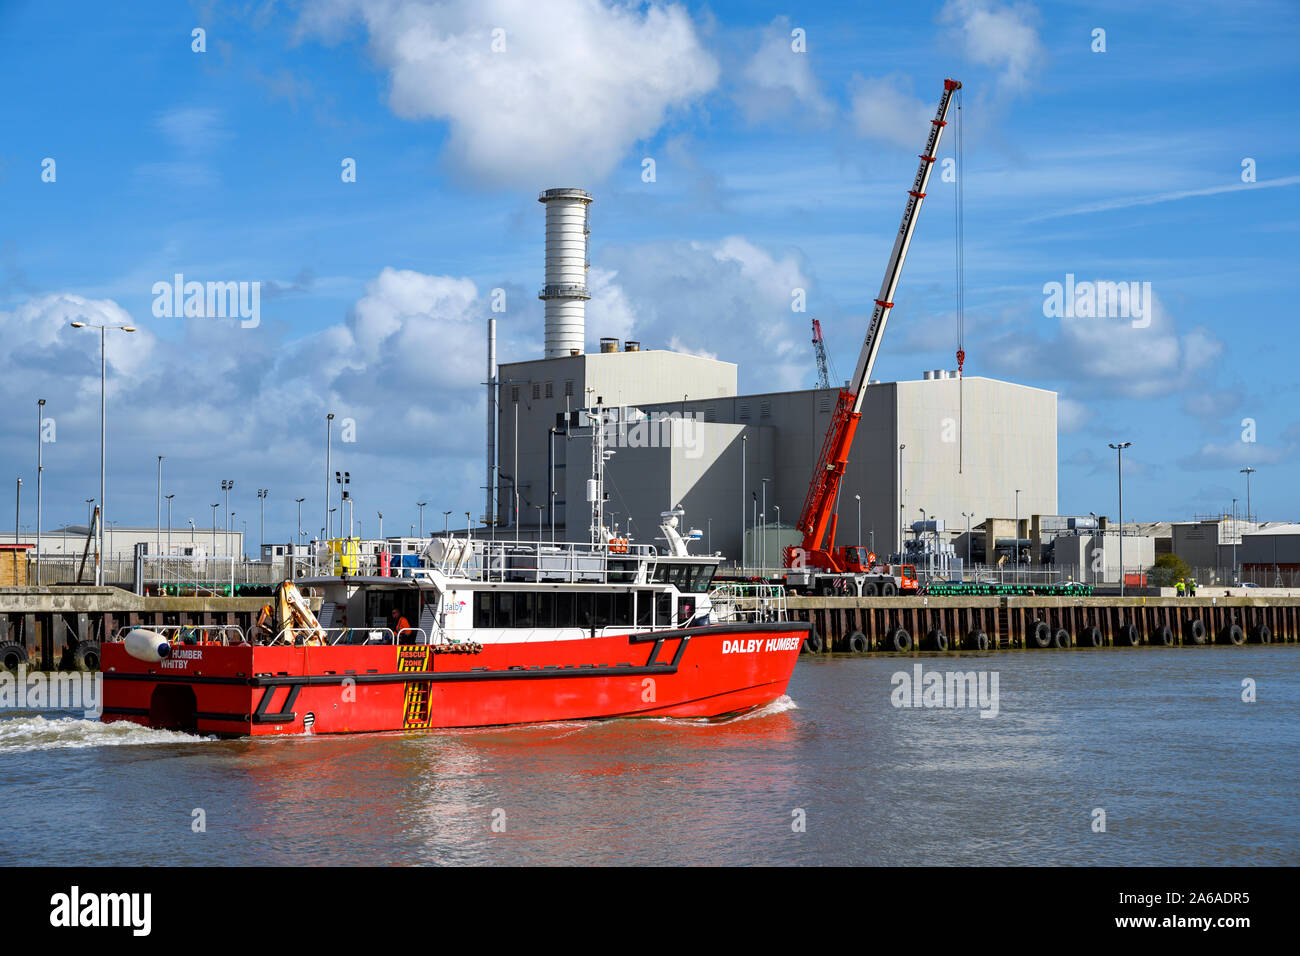 Dalby Humber offshore support vessel, Great Yarmouth, Norfolk, UK. Stock Photo